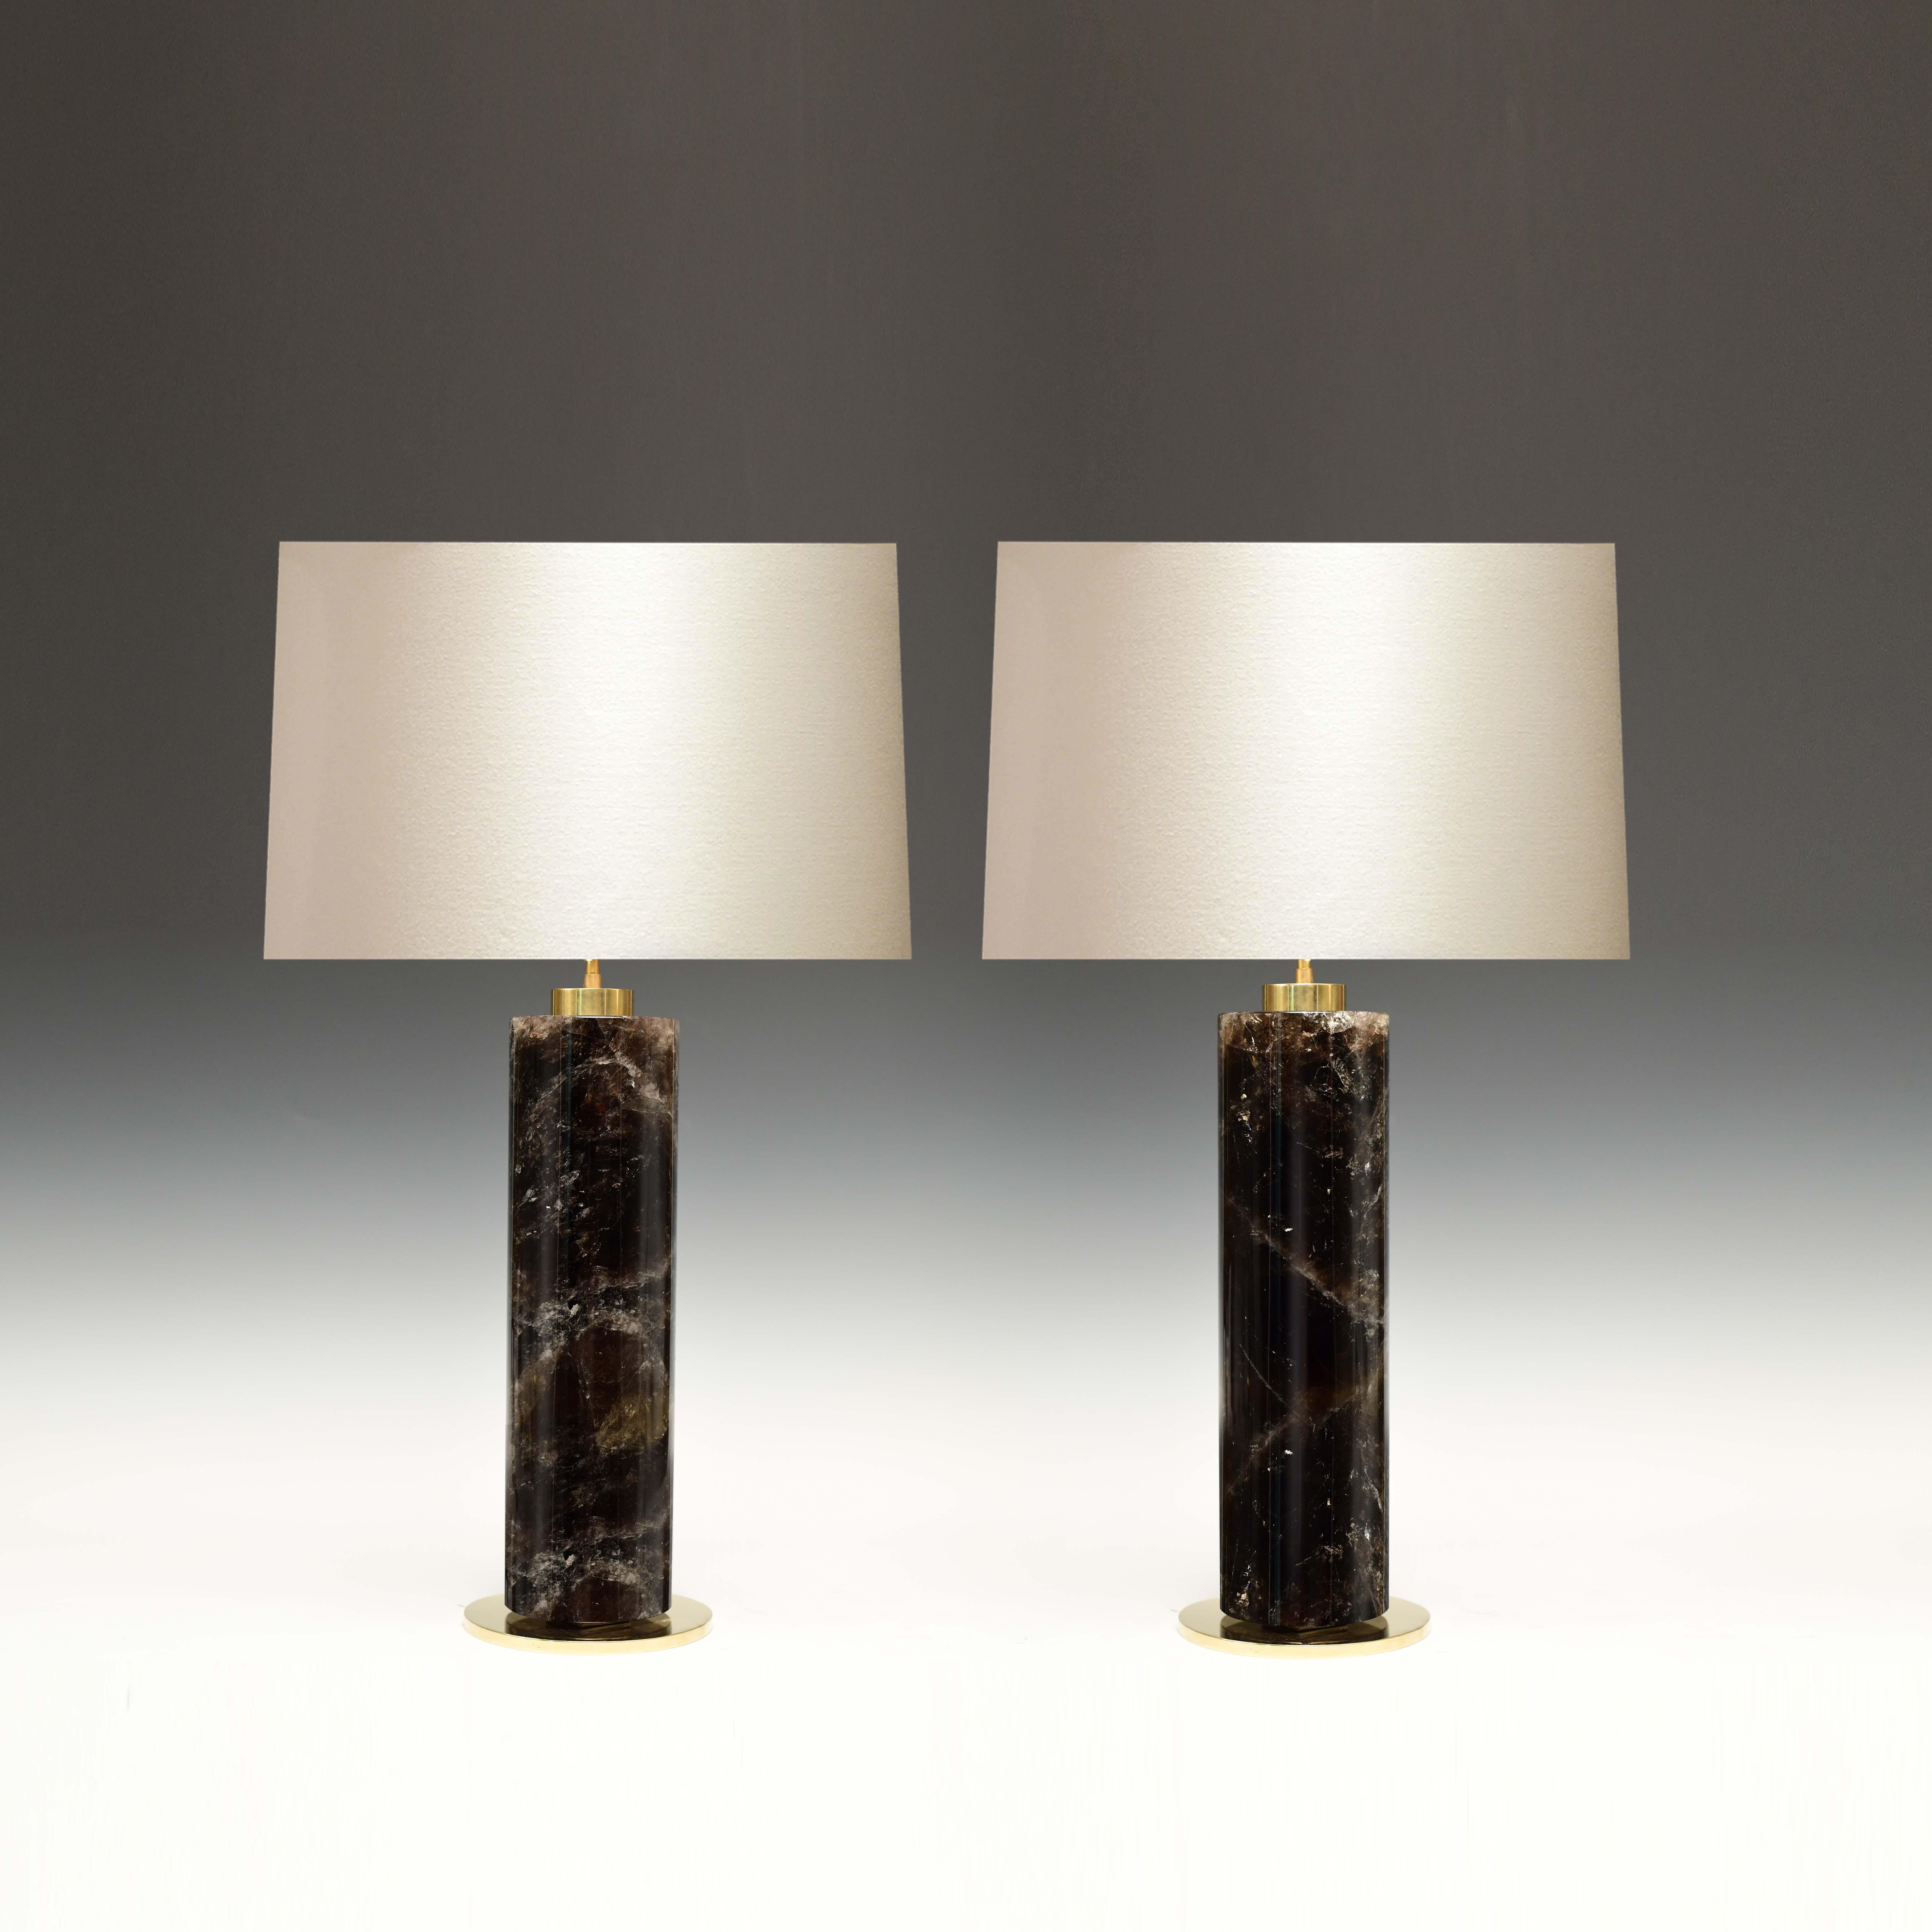 Square column form dark rock crystal lamps with the polish brass base. Created by Phoenix, NYC. 
To the top of the rock crystal: 18